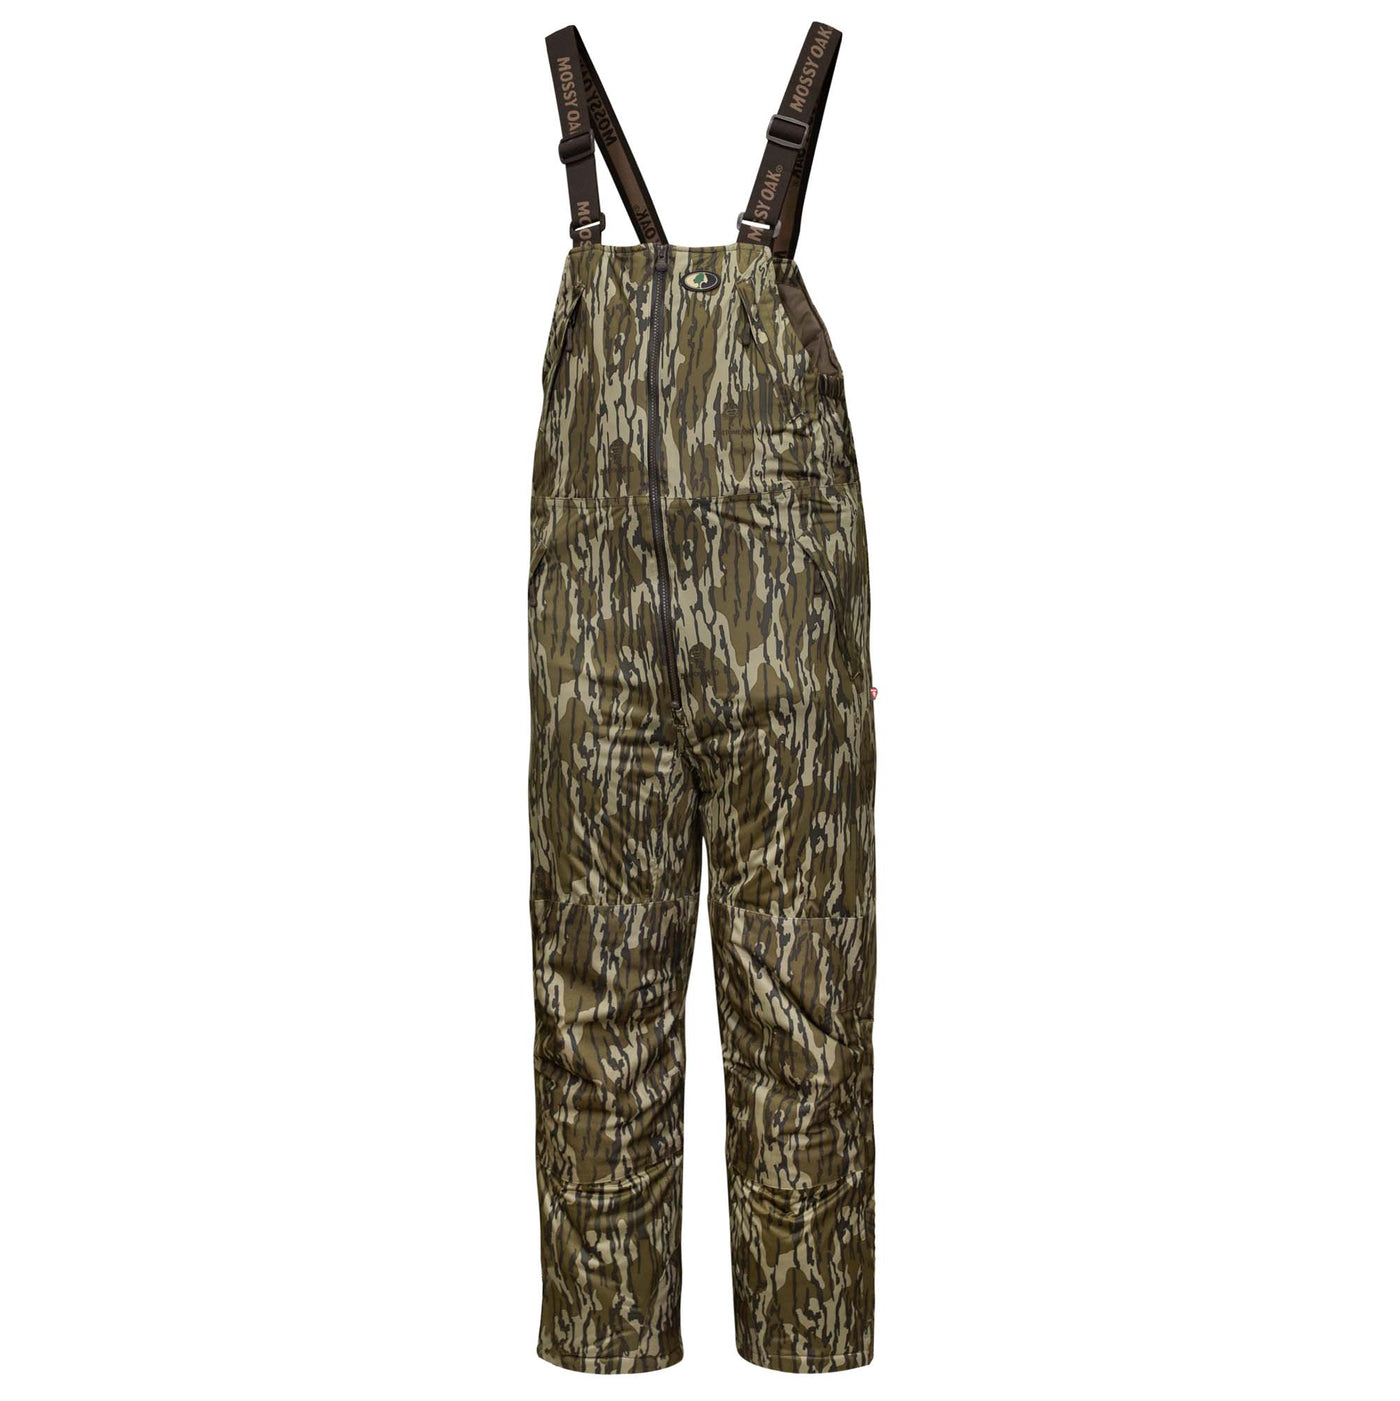 Mossy Oak Men’s Waterproof Breathable Insulated Bib Overall Original Bottomland Front